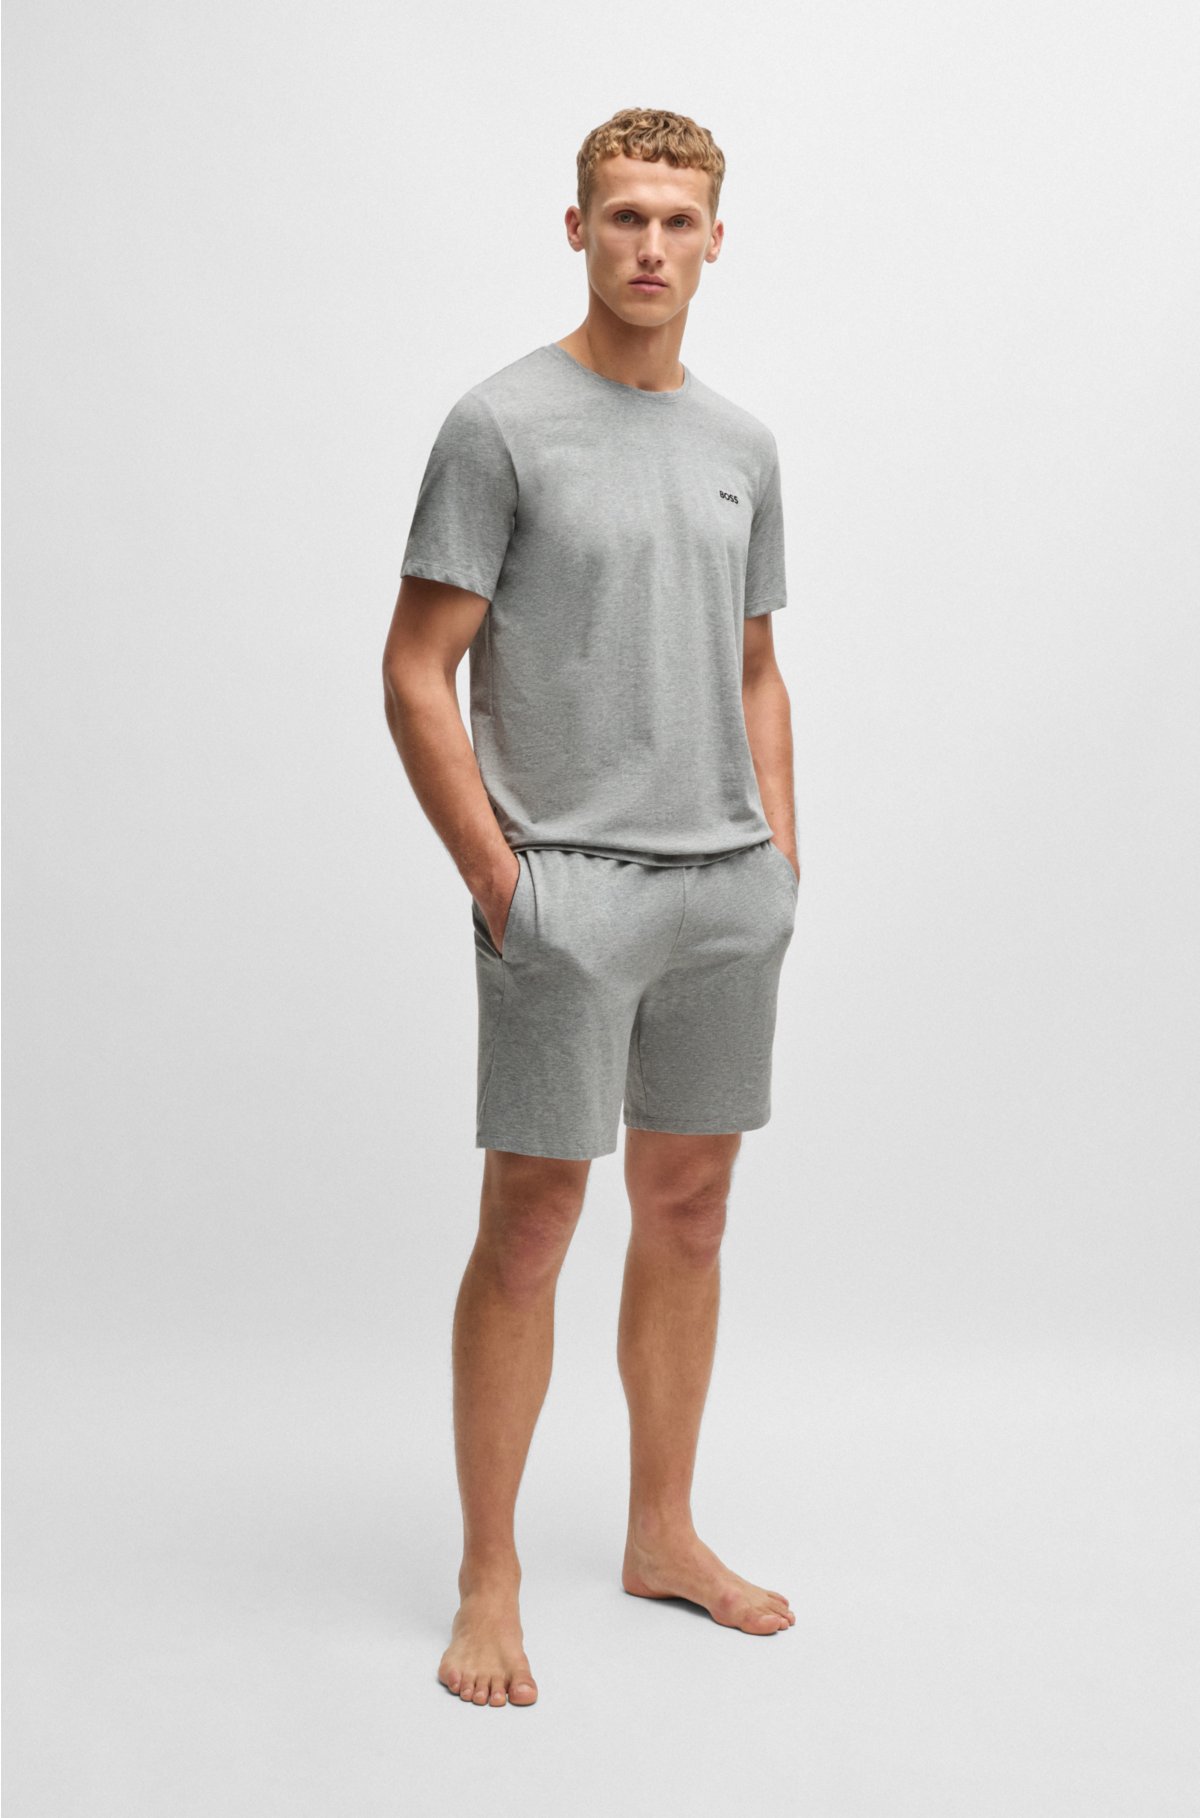 Stretch-cotton shorts with embroidered logo, Grey